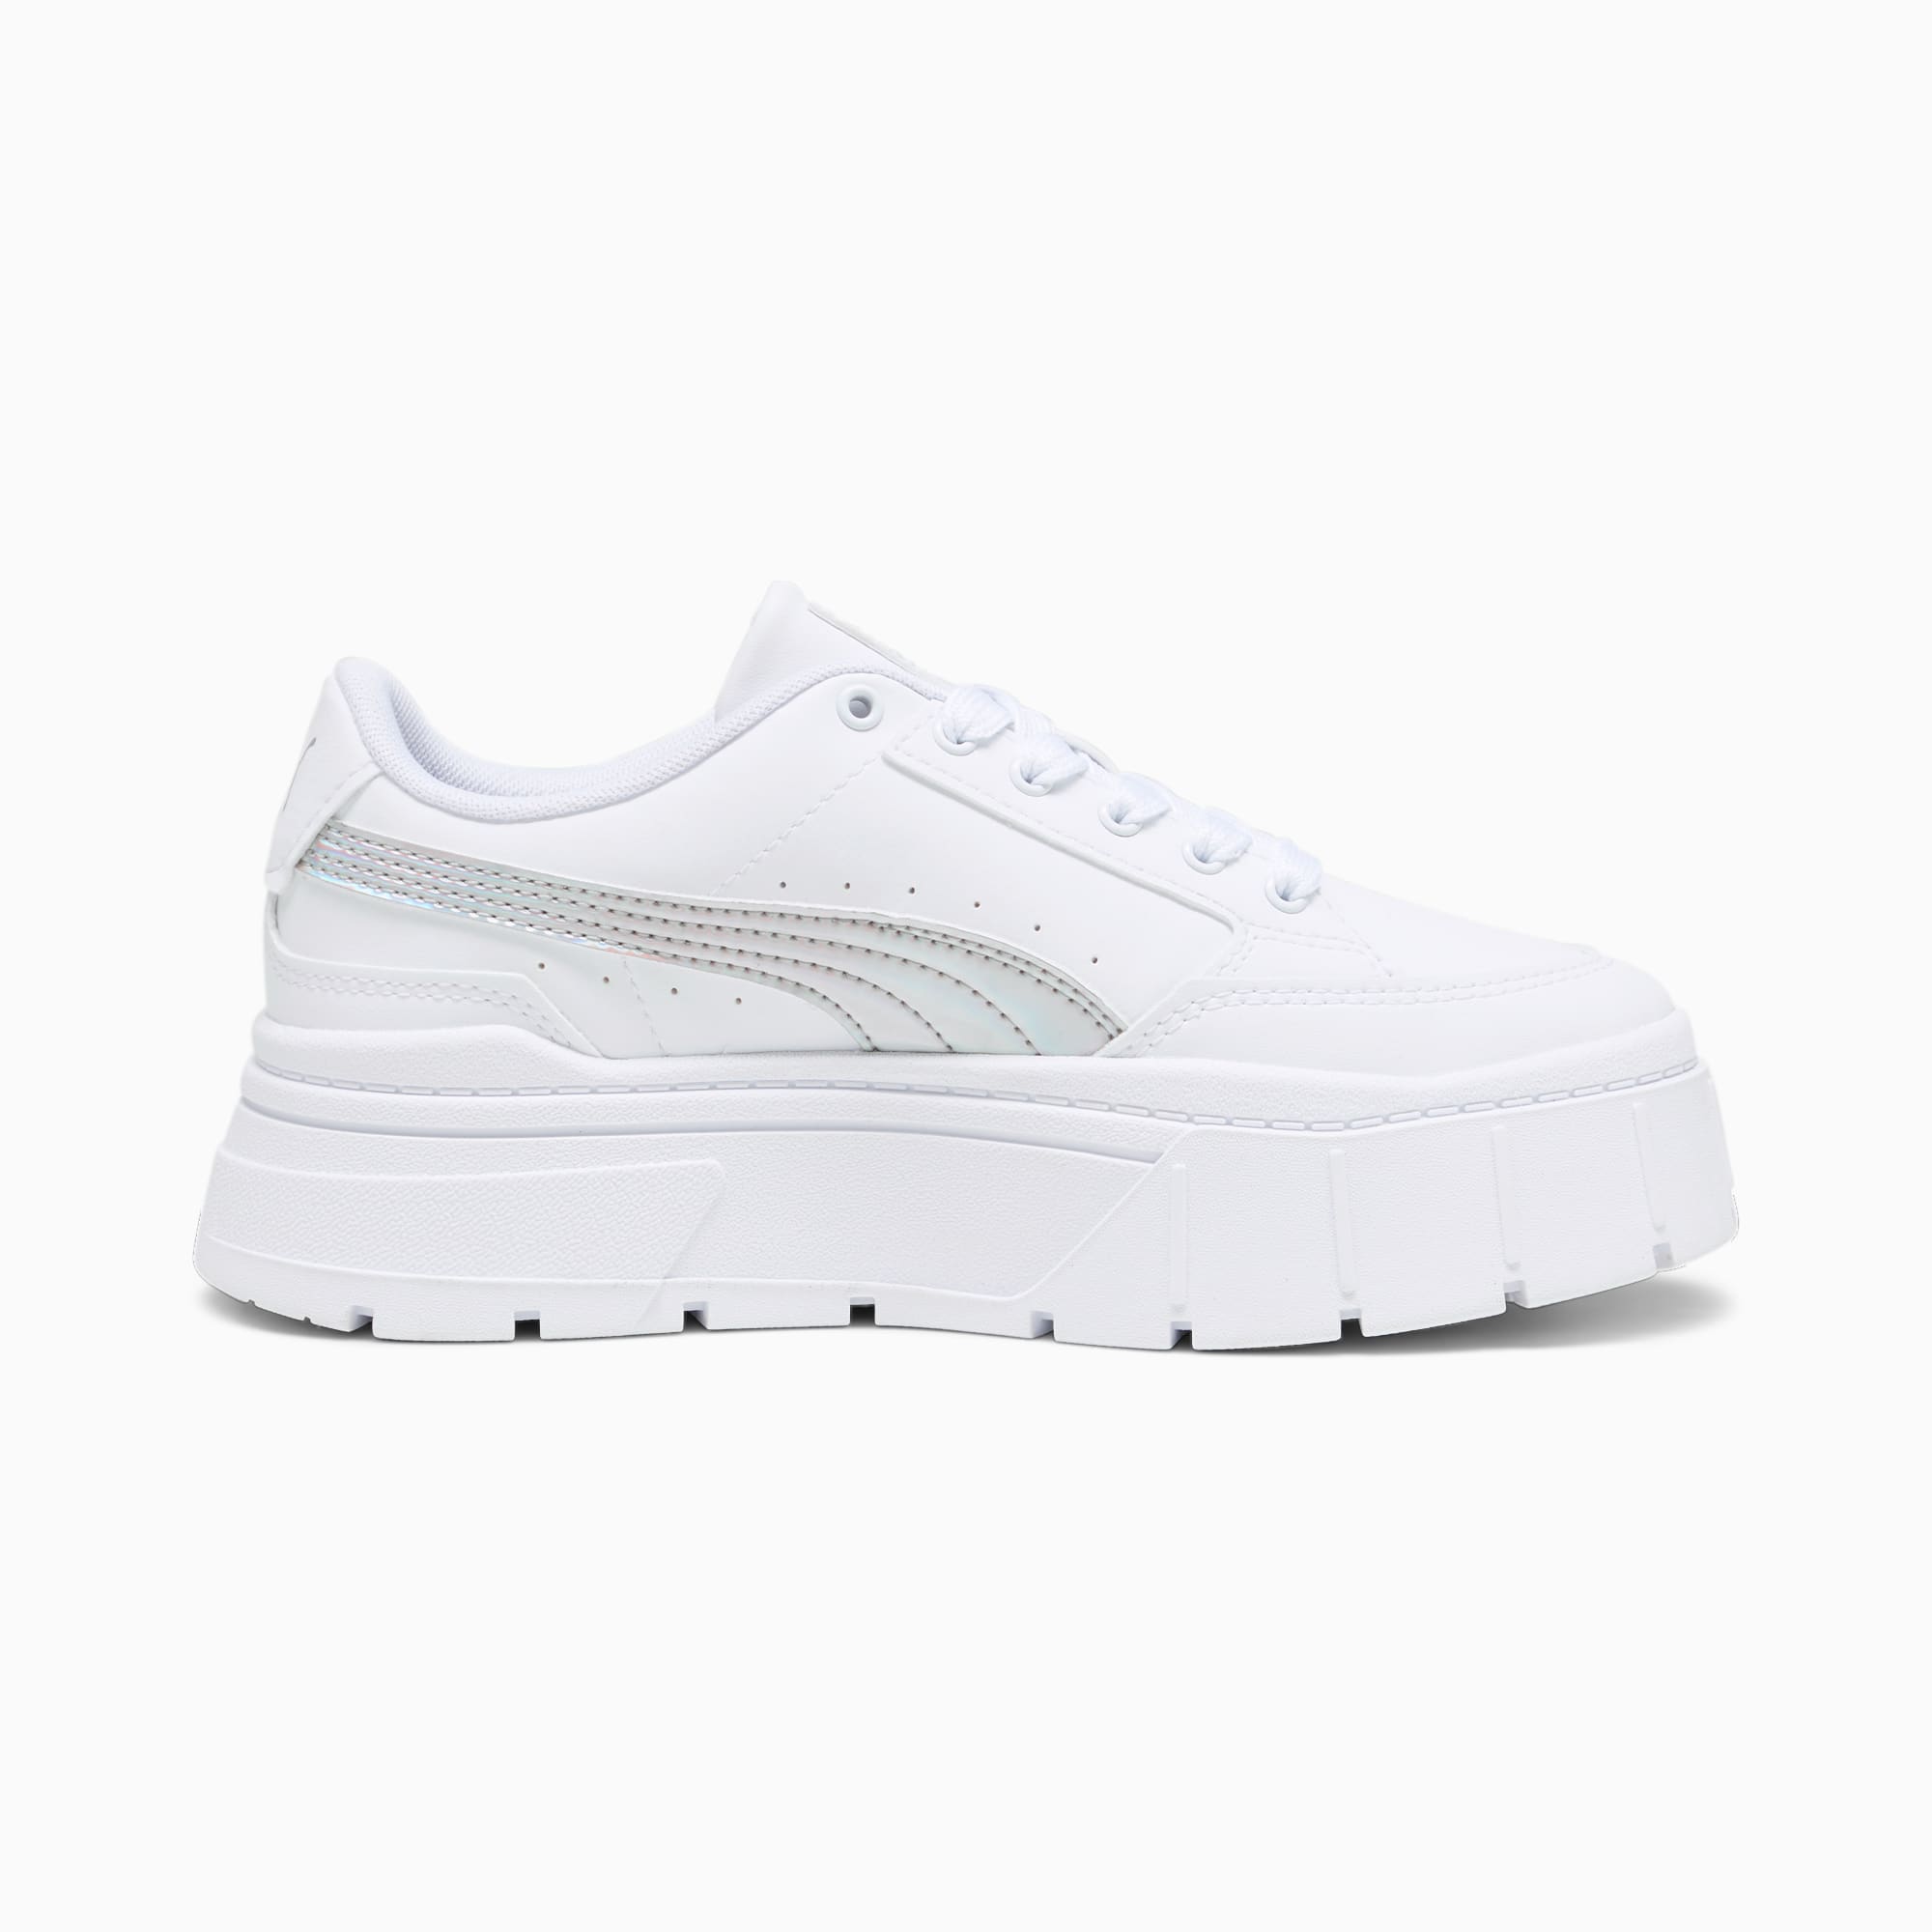 PUMA Mayze Stack Iridescent Youth Sneakers, White/Silver